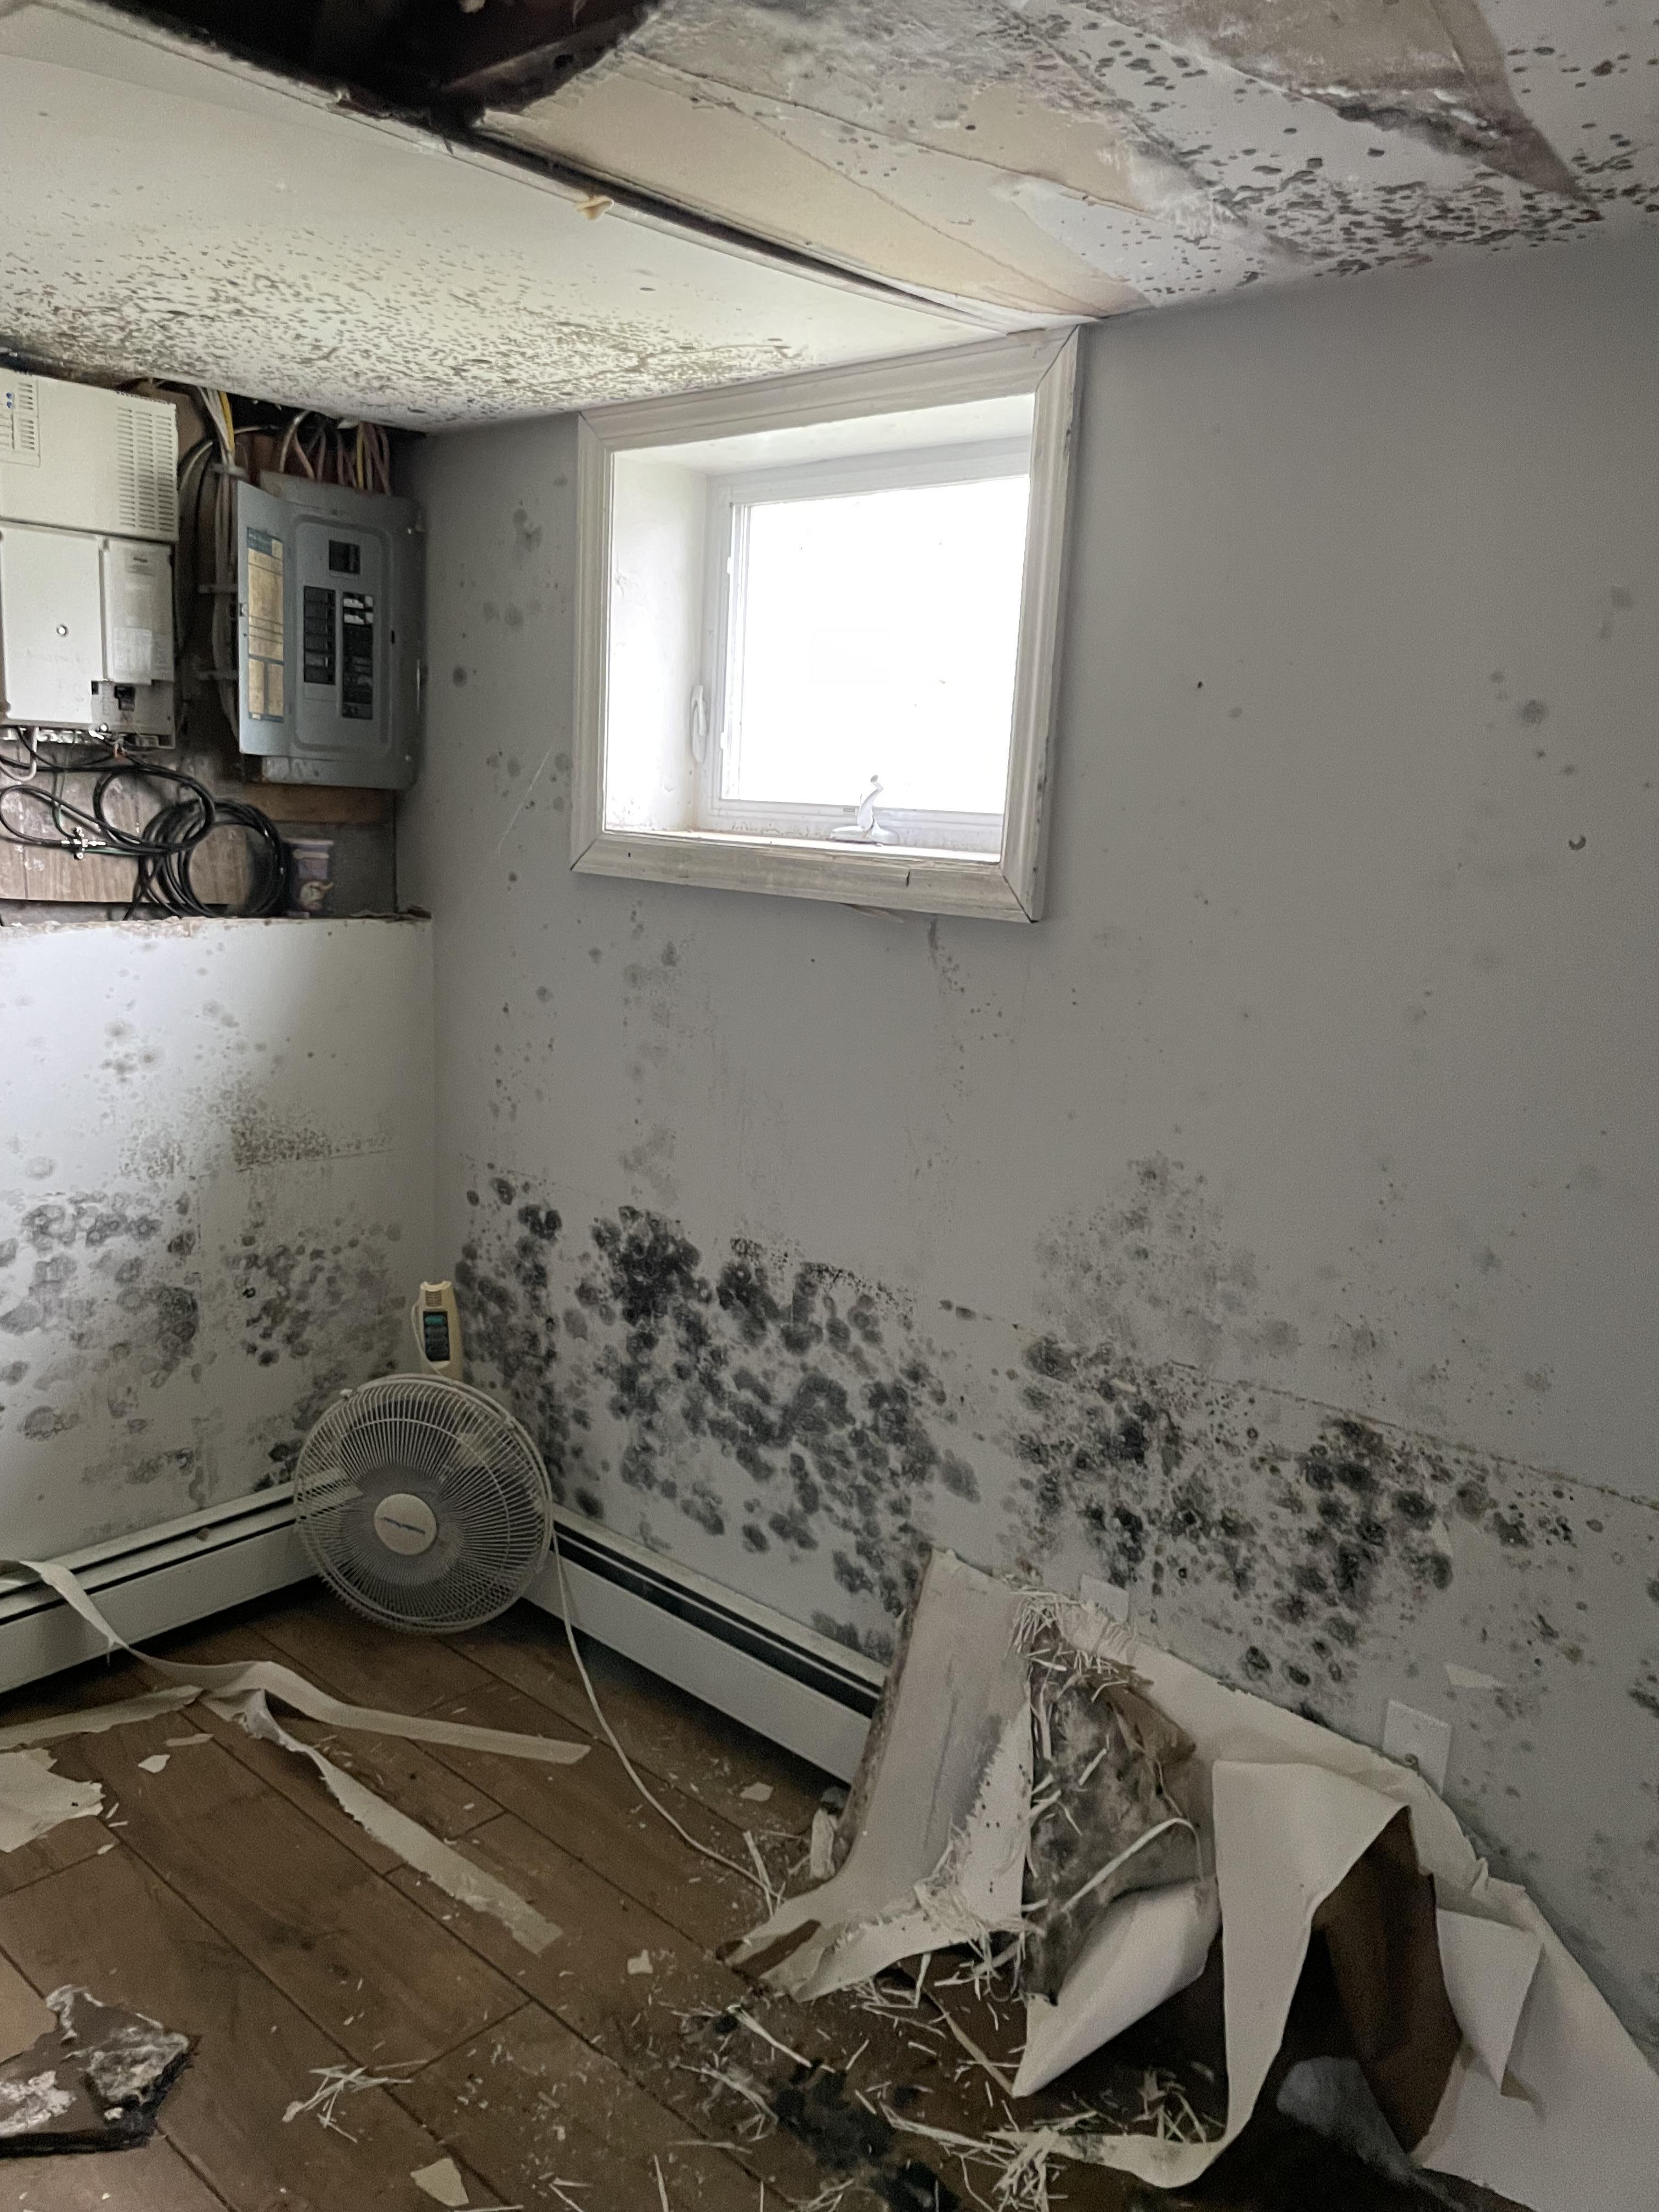 Mold throughout the entire finished basement